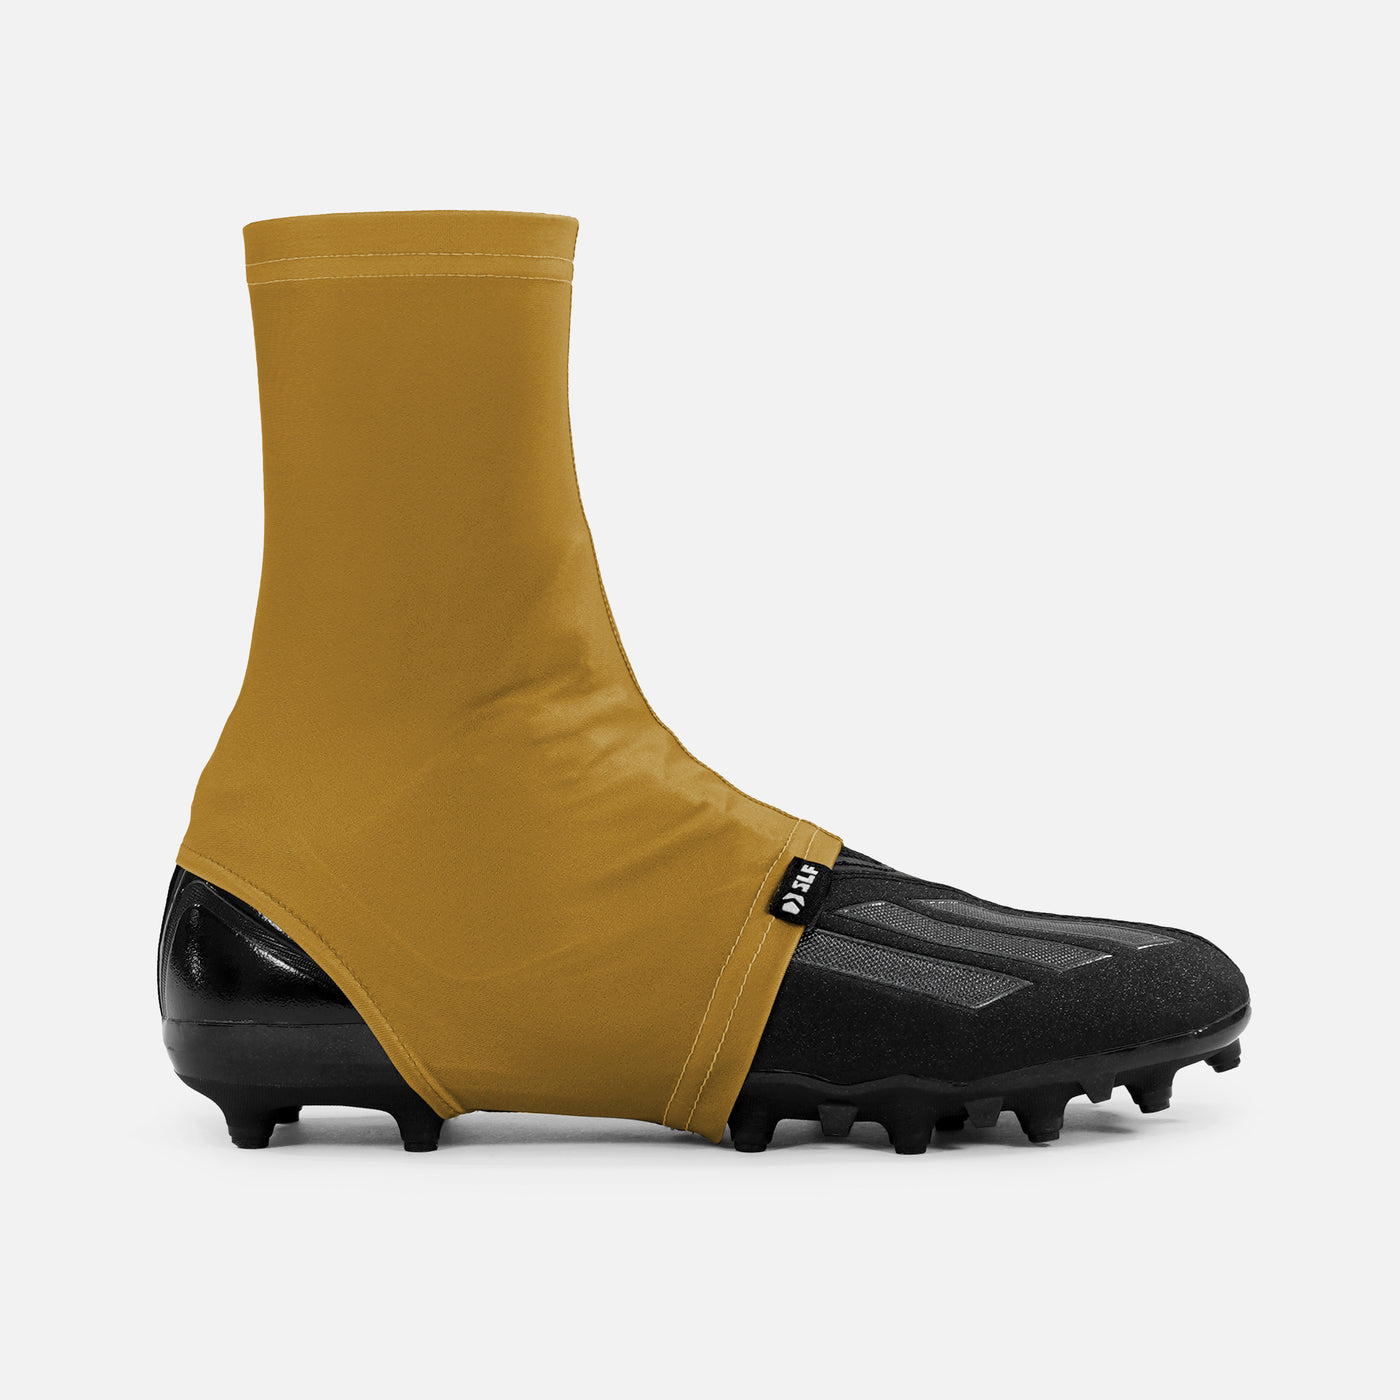 Hue Gold Spats / Cleat Covers